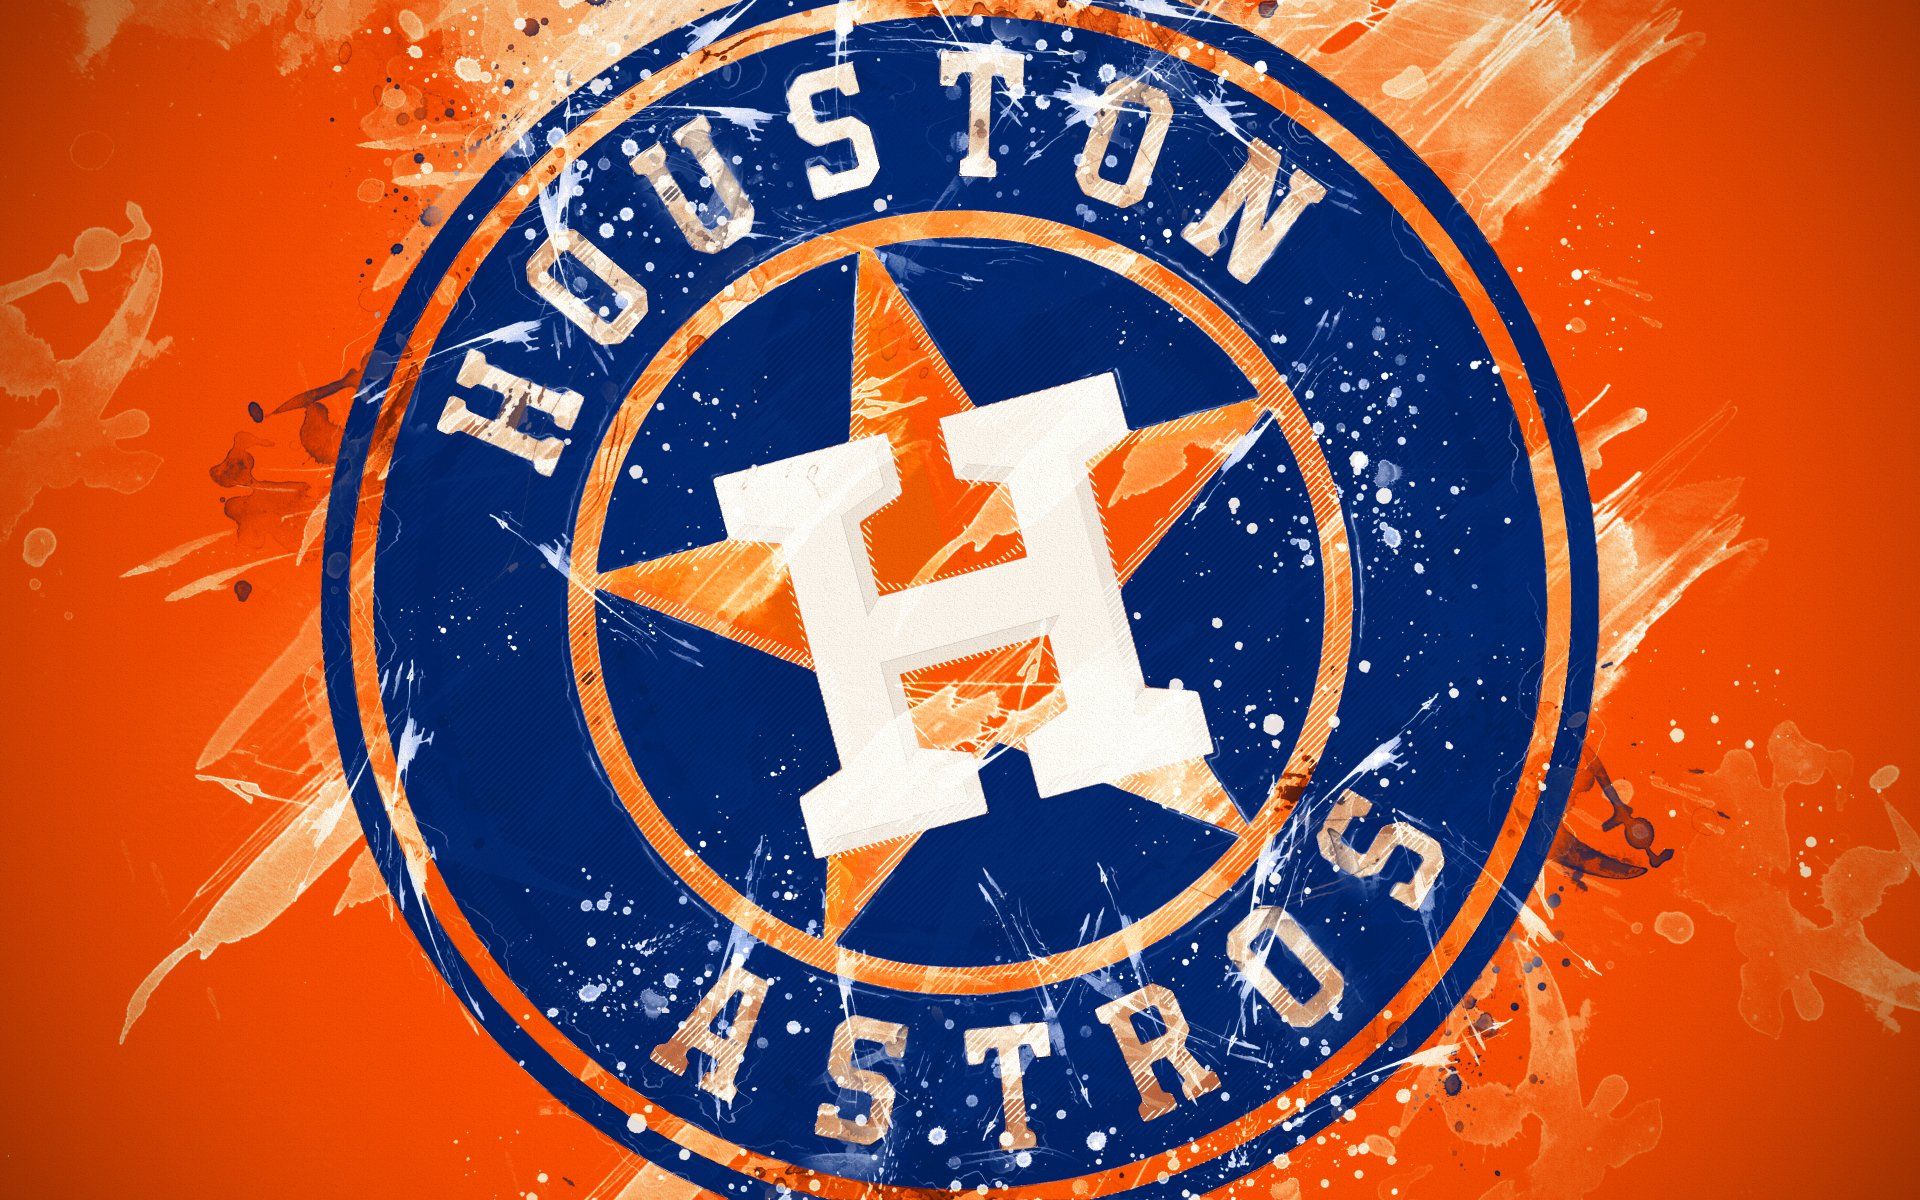 Houston Astros Wallpapers 4k, HD Houston Astros Backgrounds on